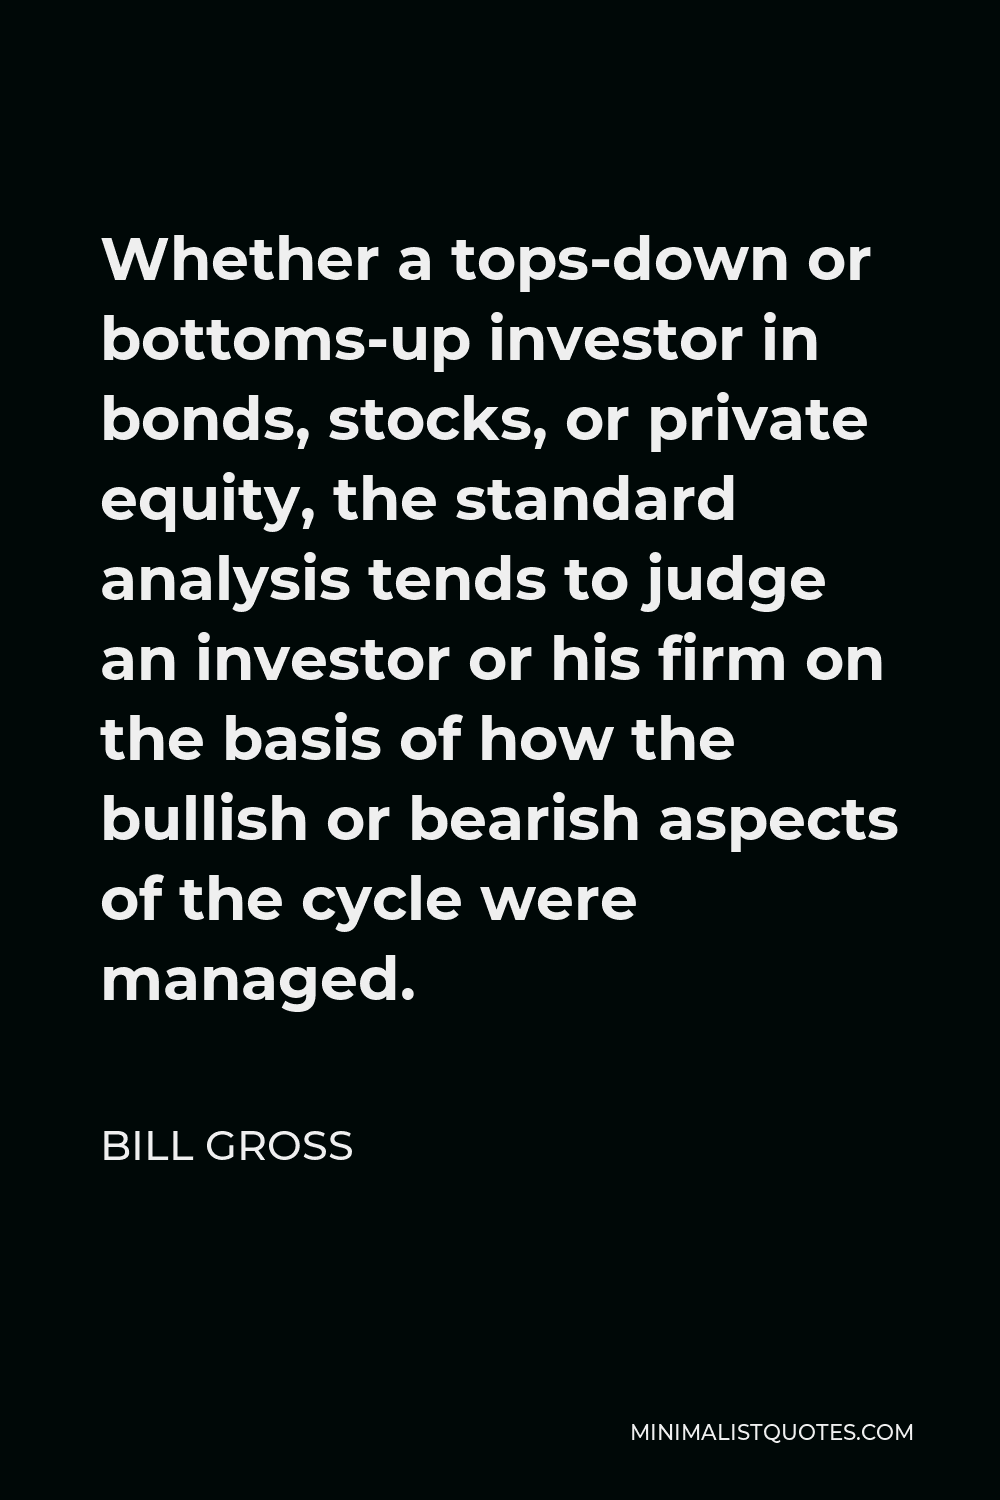 Bill Gross Quote - Whether a tops-down or bottoms-up investor in bonds, stocks, or private equity, the standard analysis tends to judge an investor or his firm on the basis of how the bullish or bearish aspects of the cycle were managed.